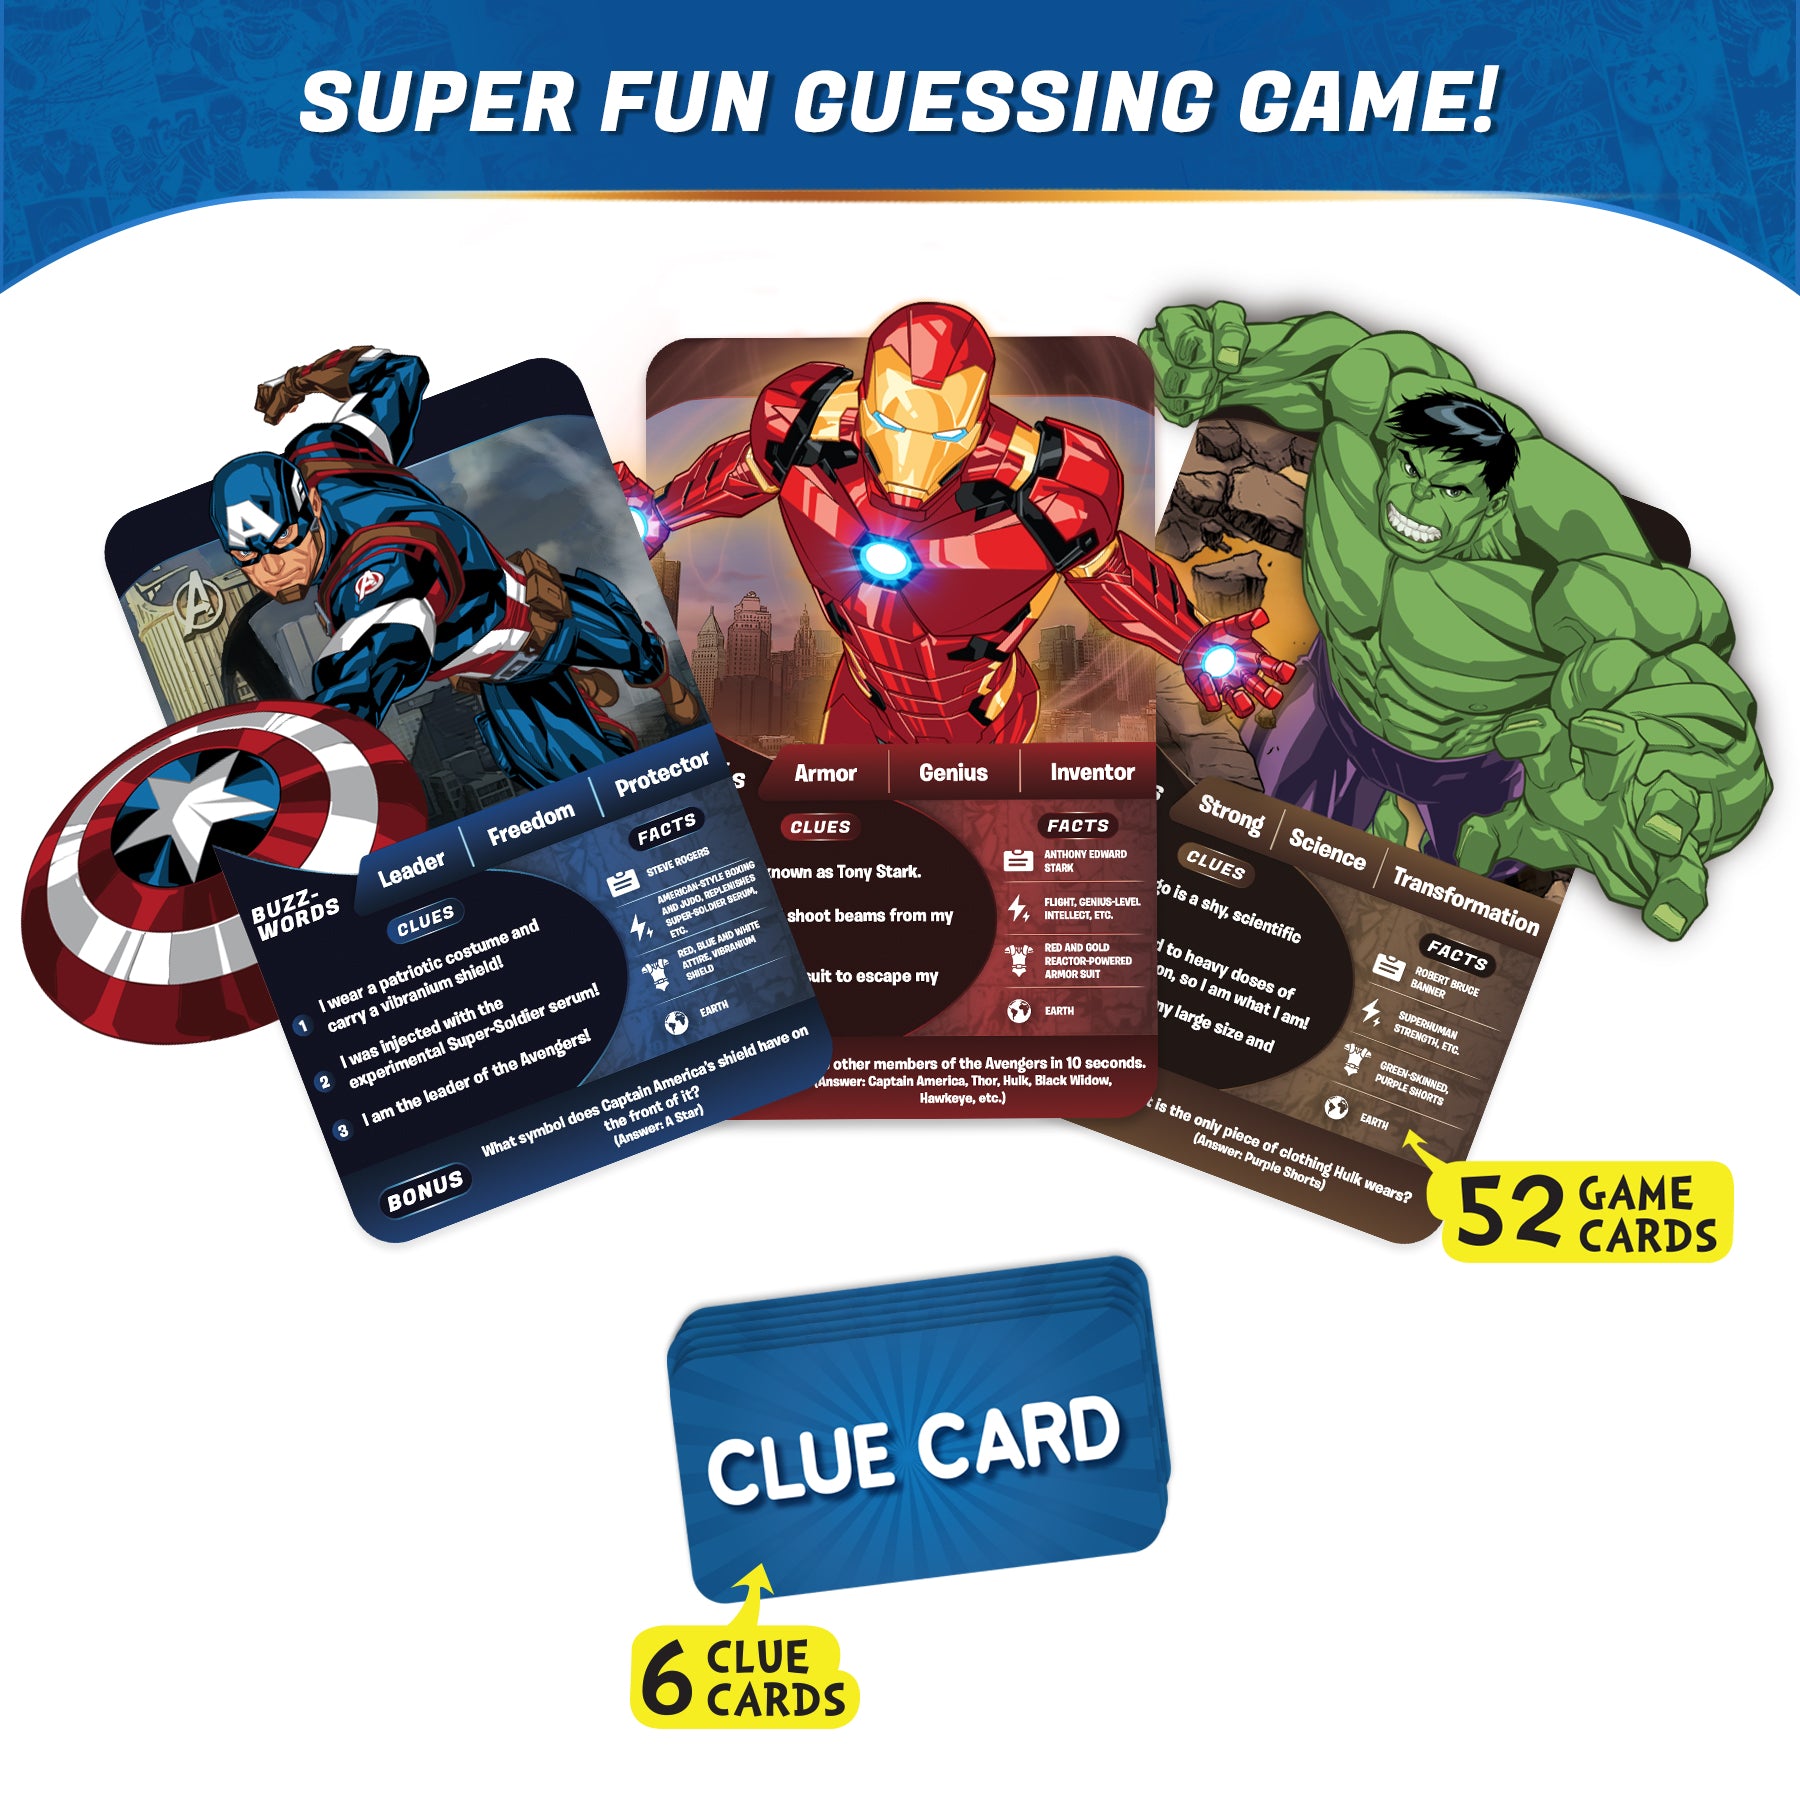 Guess in 10 - Marvel Edition